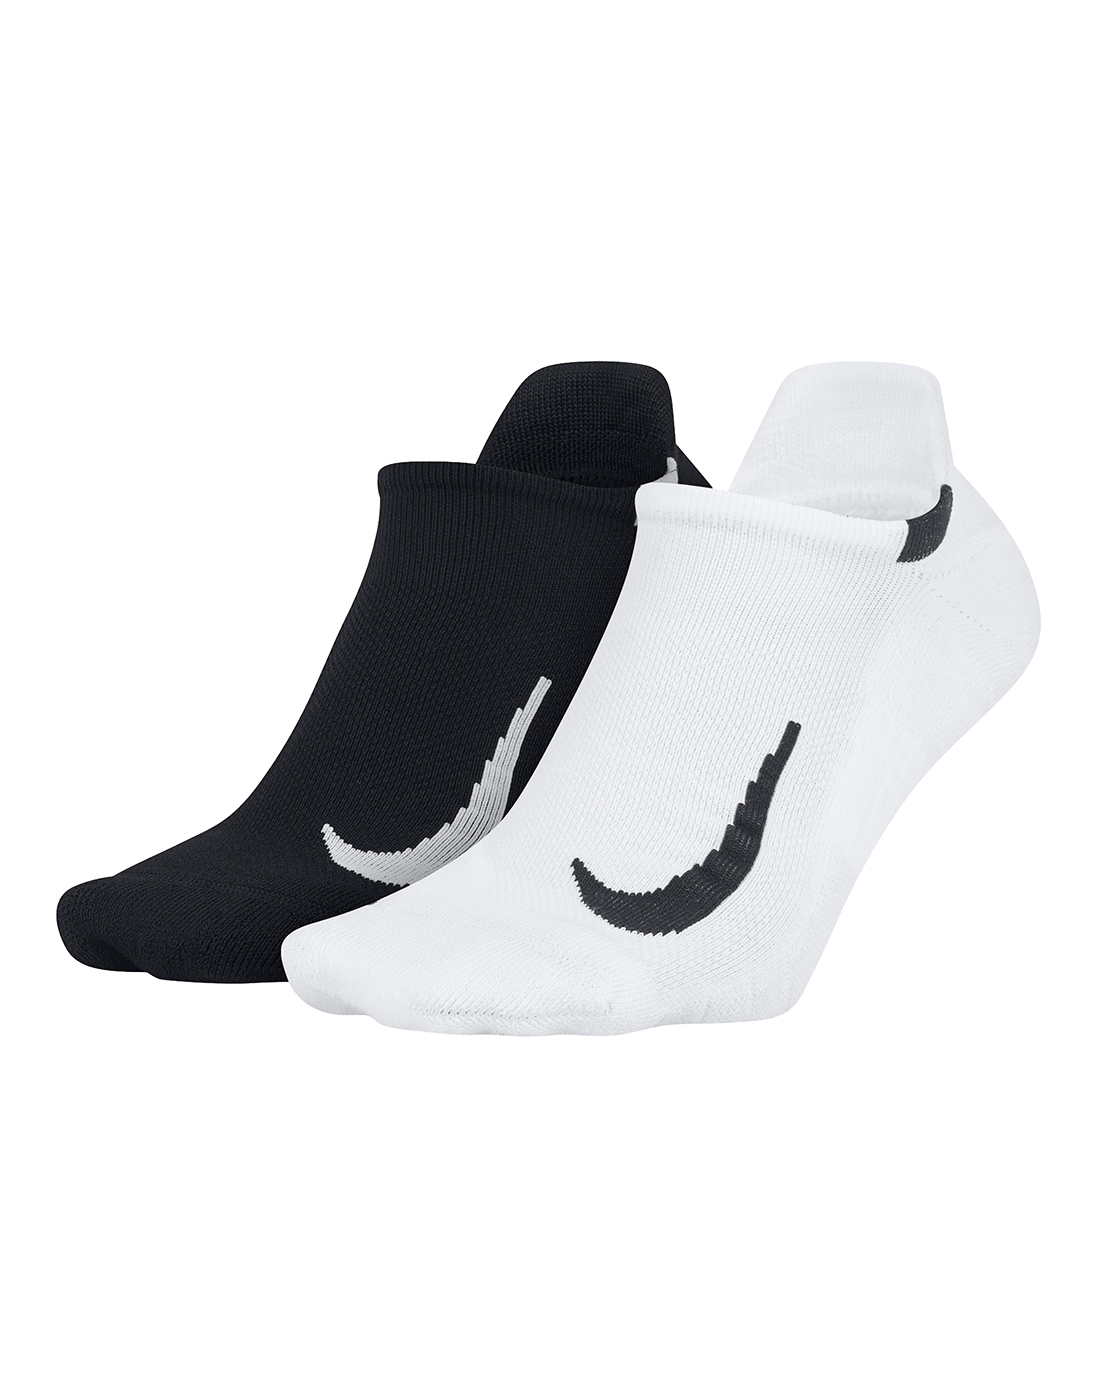 Nike Multiplier Running No Show 2 Pack Socks - Assorted | Life Style ...